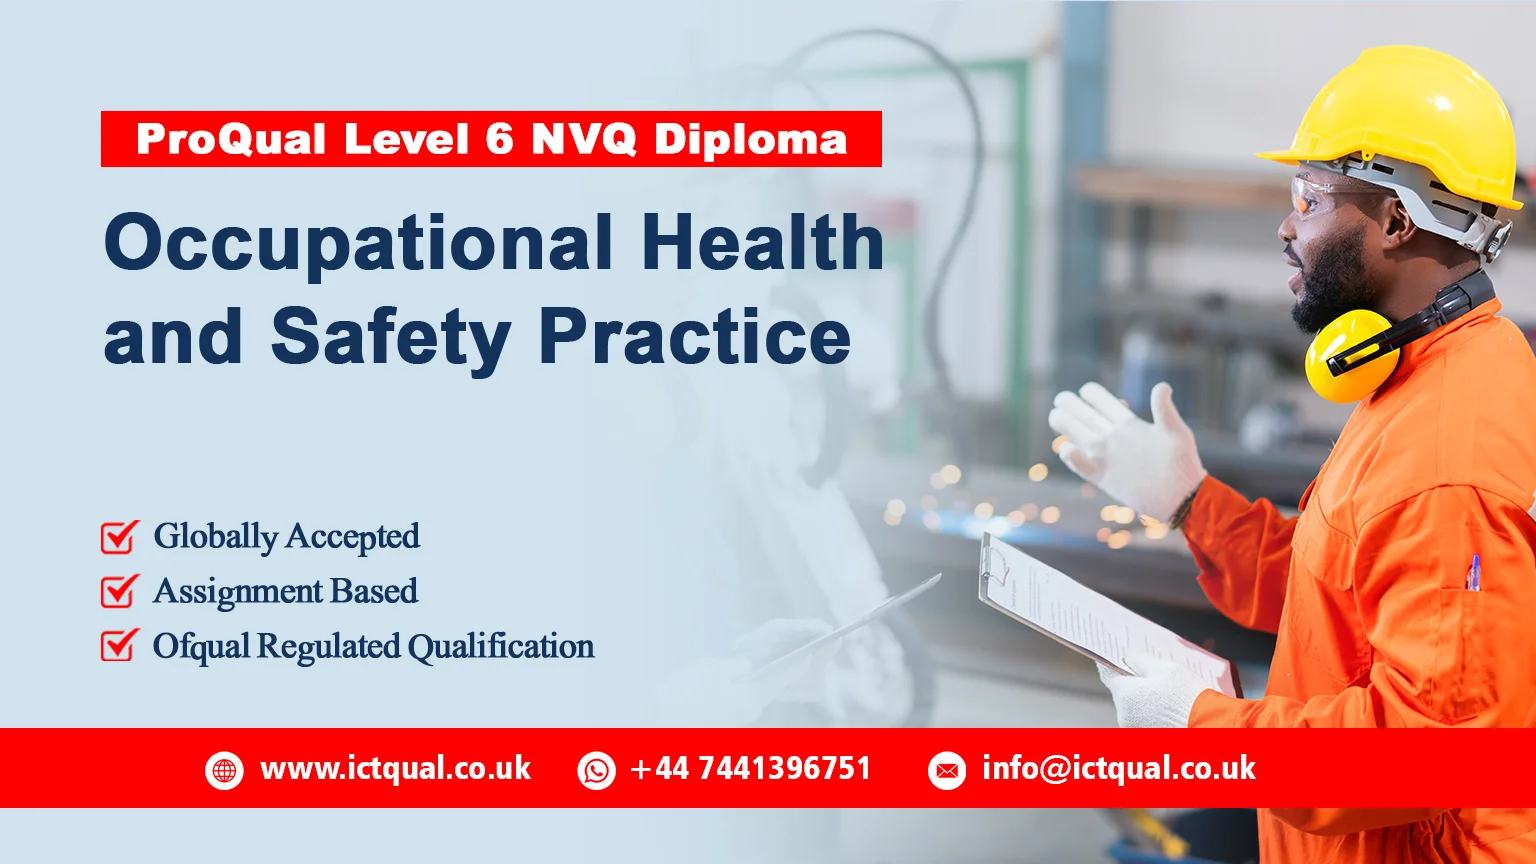 ProQual Level 6 NVQ Diploma In Occupational Health & Safety Practice